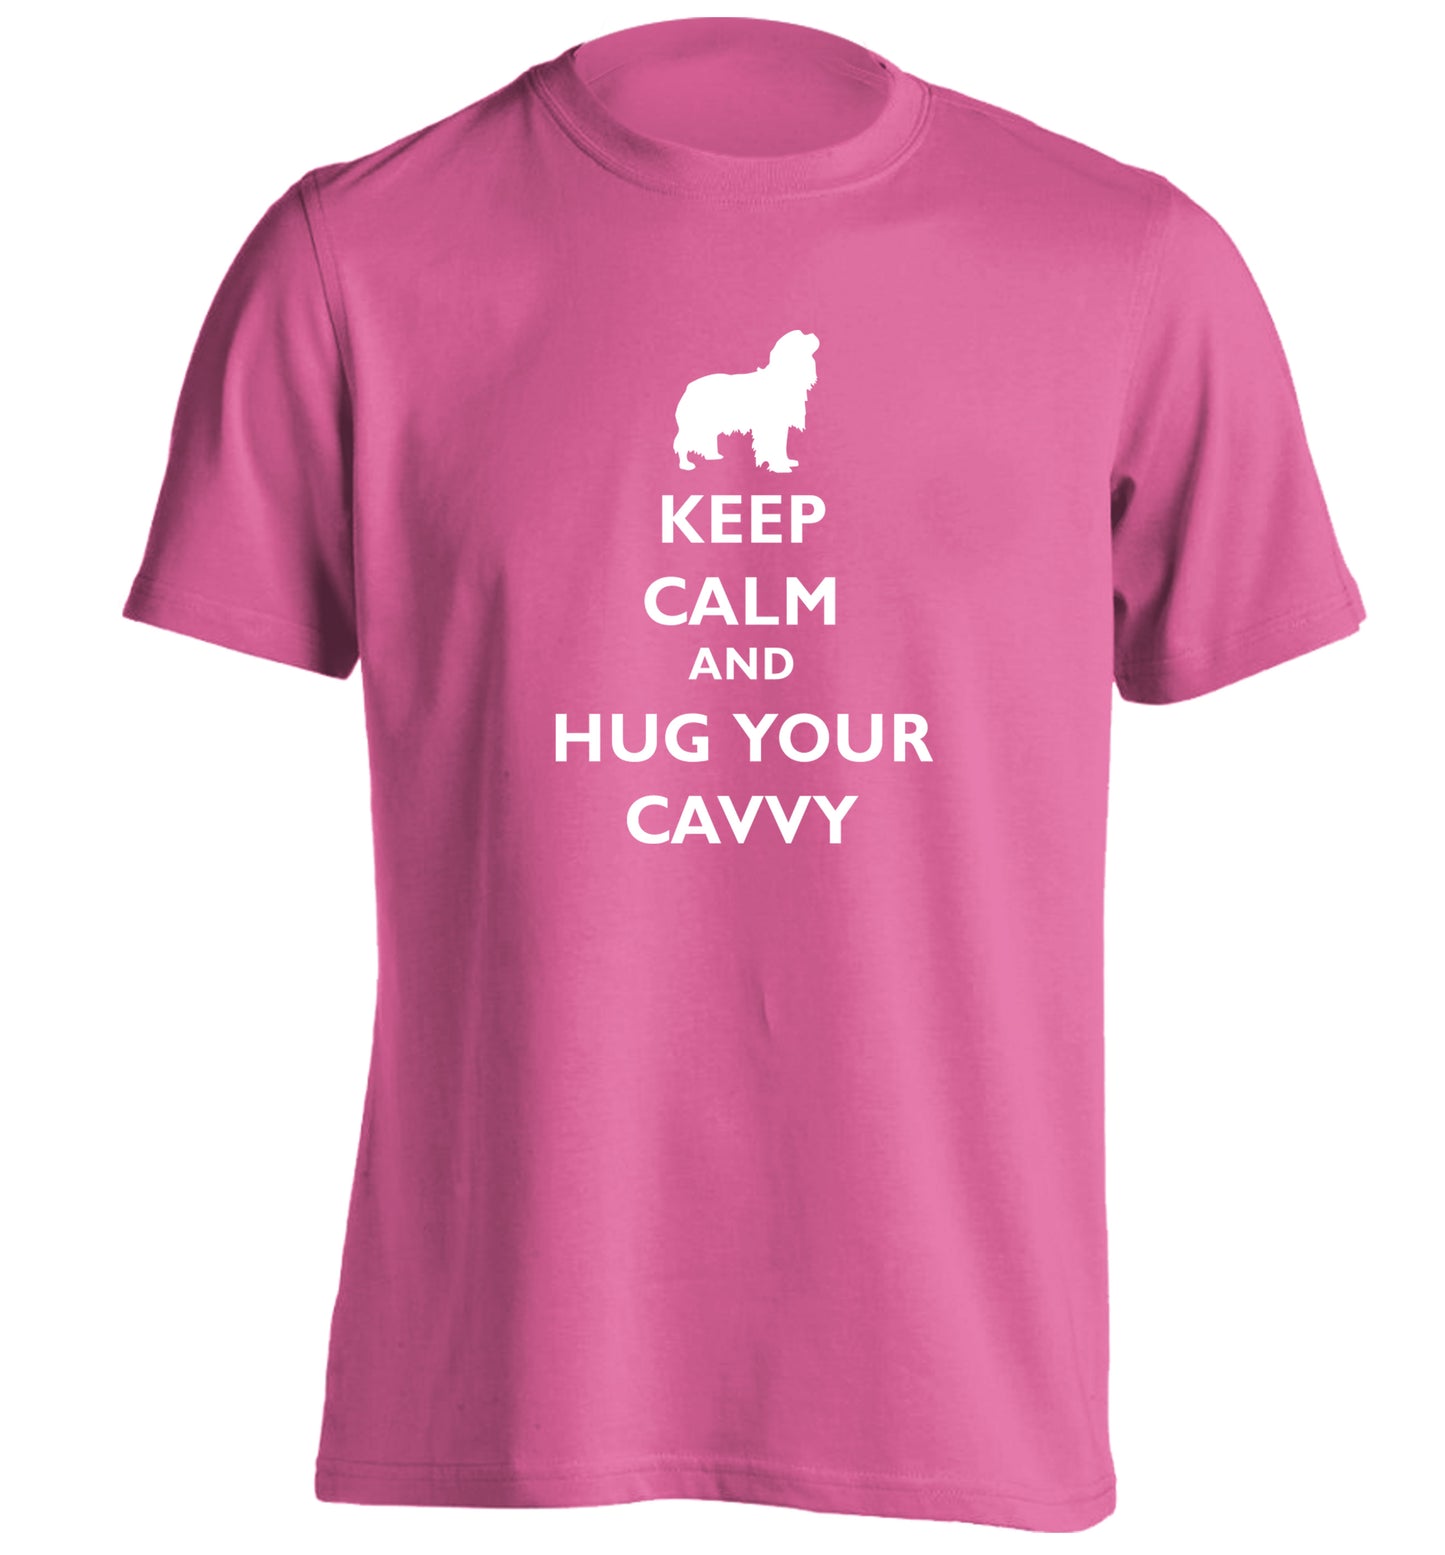 Keep calm and hug your cavvy adults unisex pink Tshirt 2XL